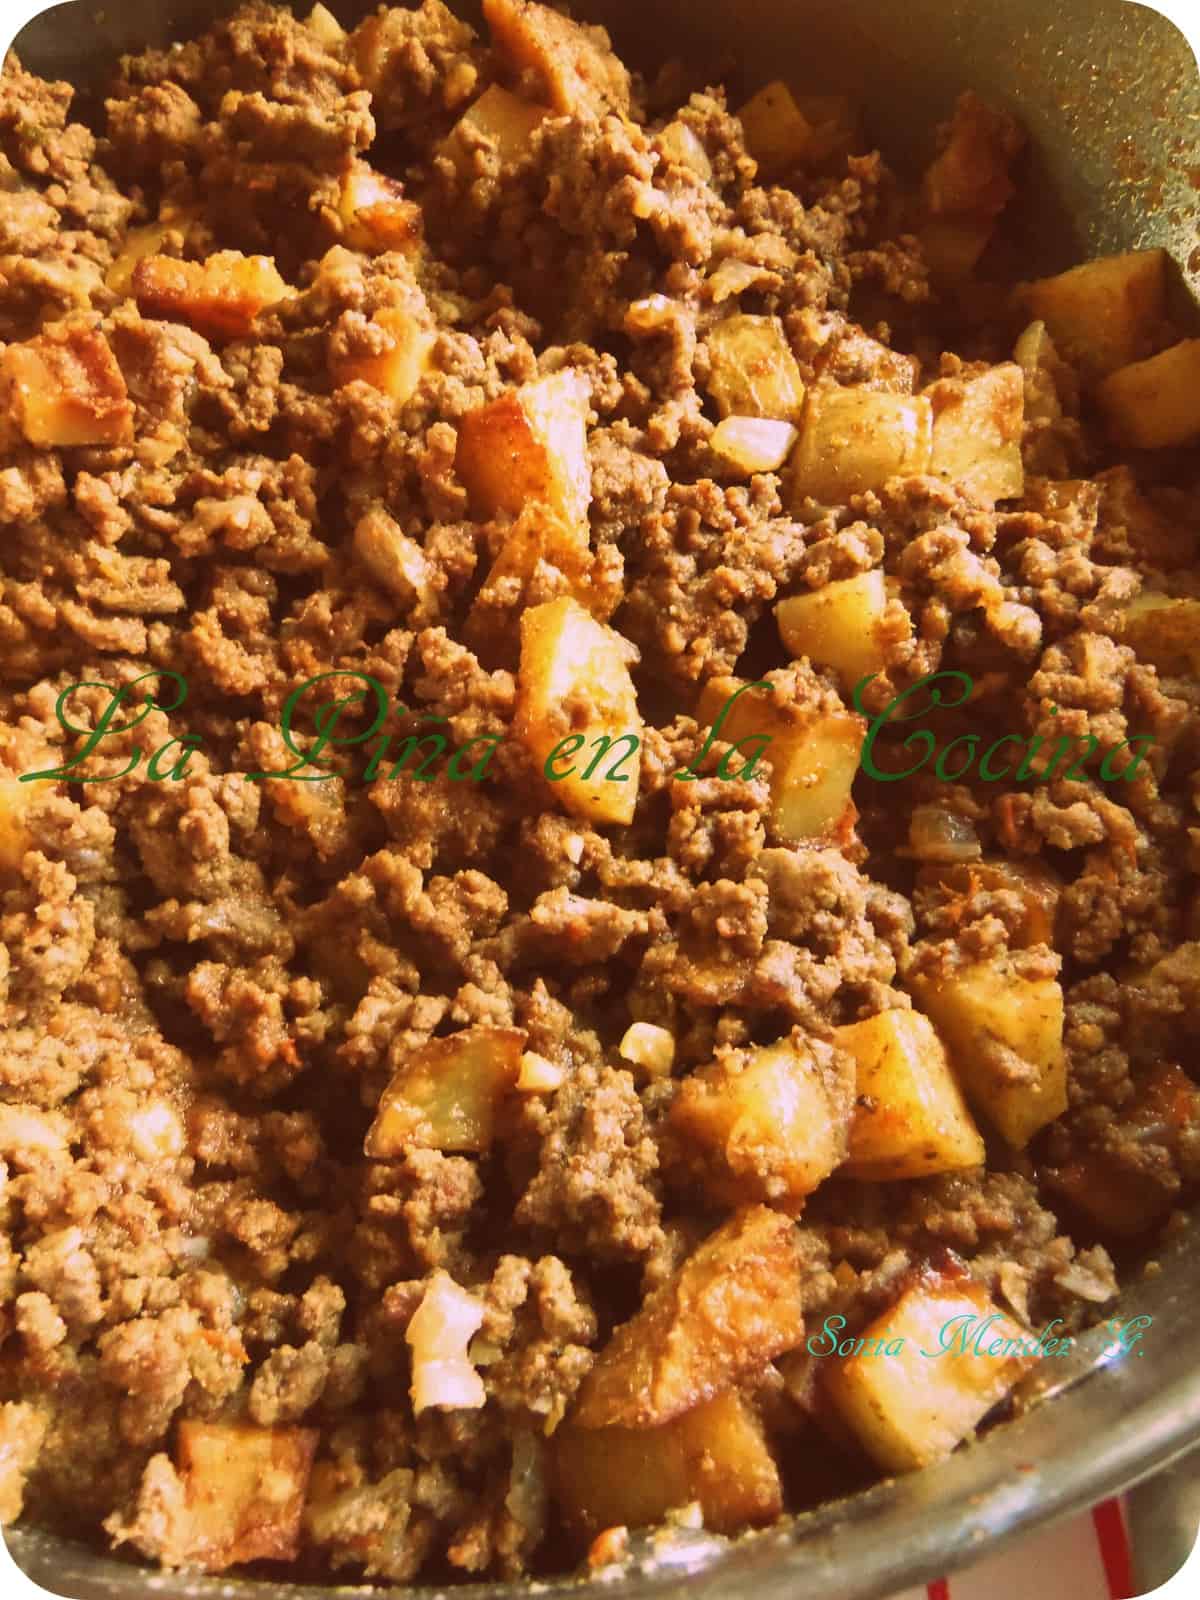 Near and dear to my heart. Mom's recipe for beef picadillo....loved it as a kid, love it even more now.